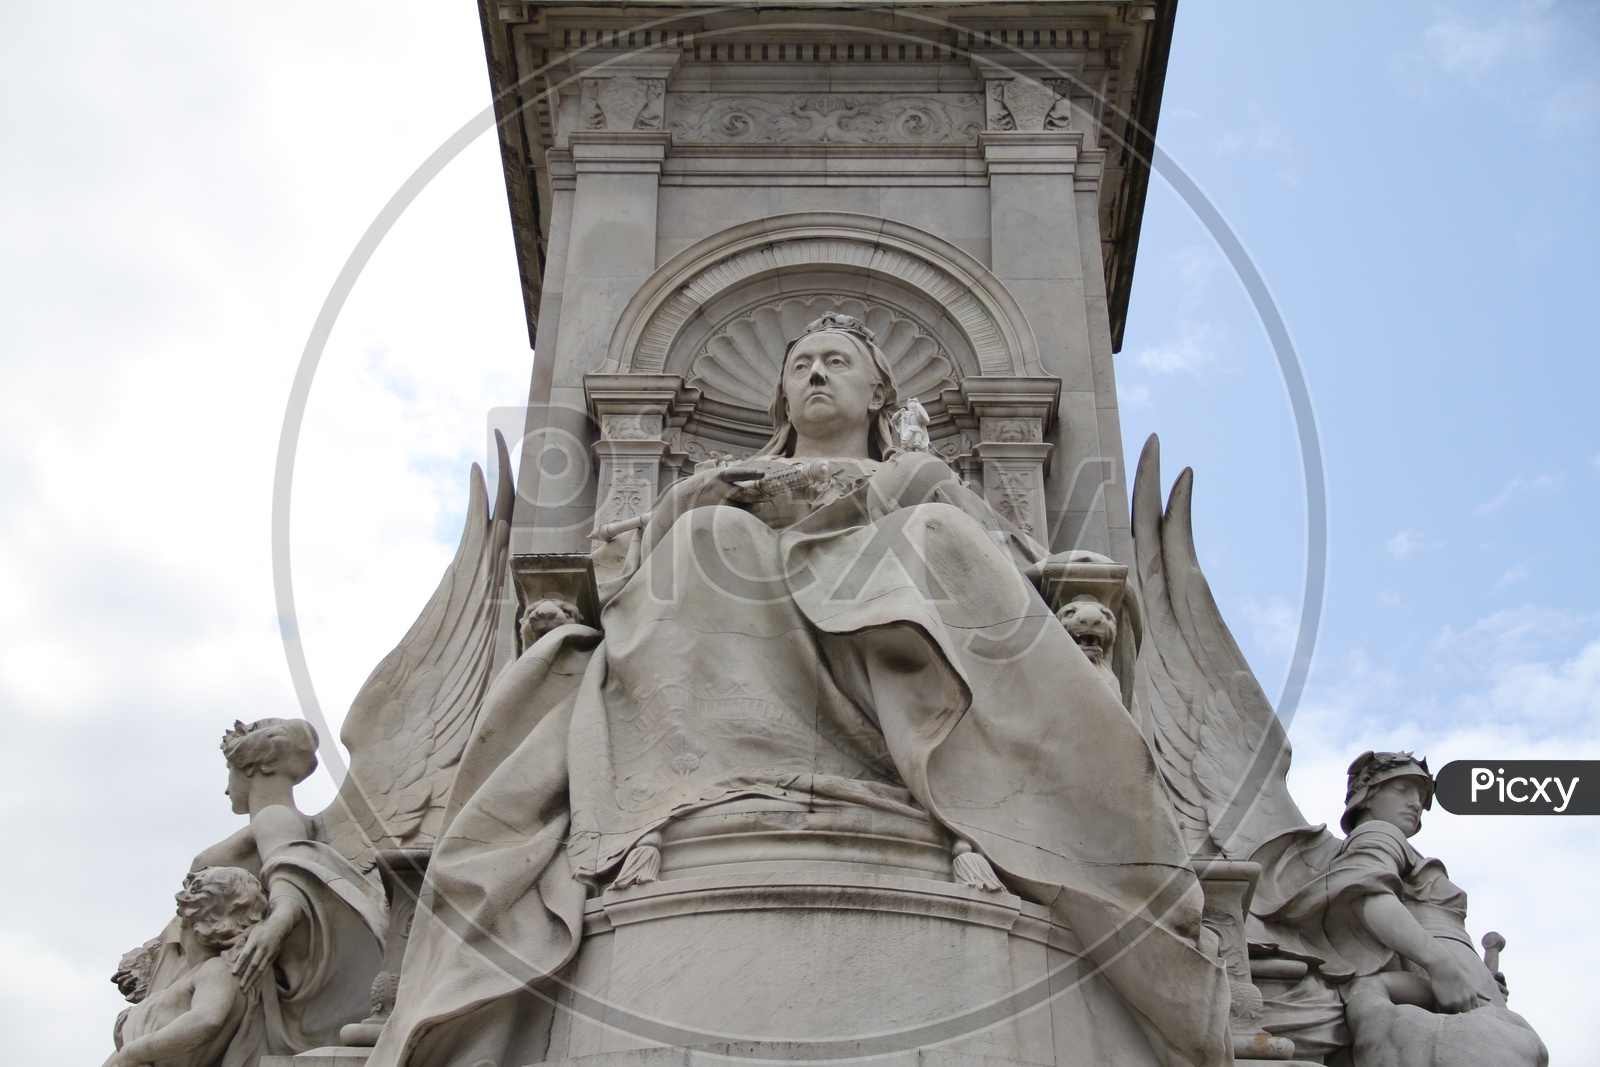 Statue of Victoria Memorial at Buckingham Palace